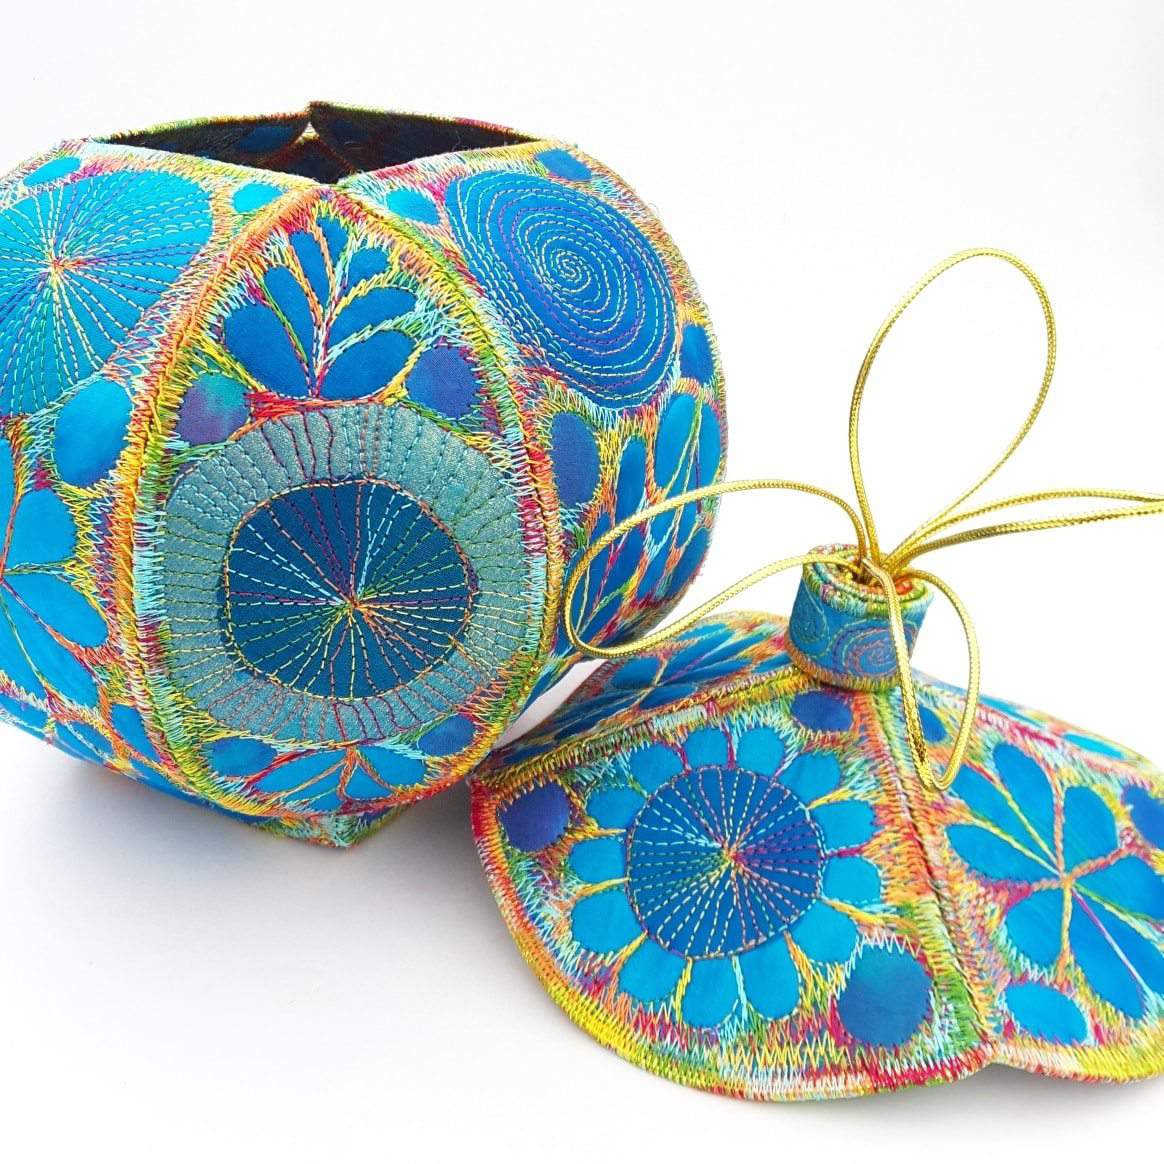 Gorgeously Patterned Textile Sculptures Of Household Objects By Sue Trevor 4